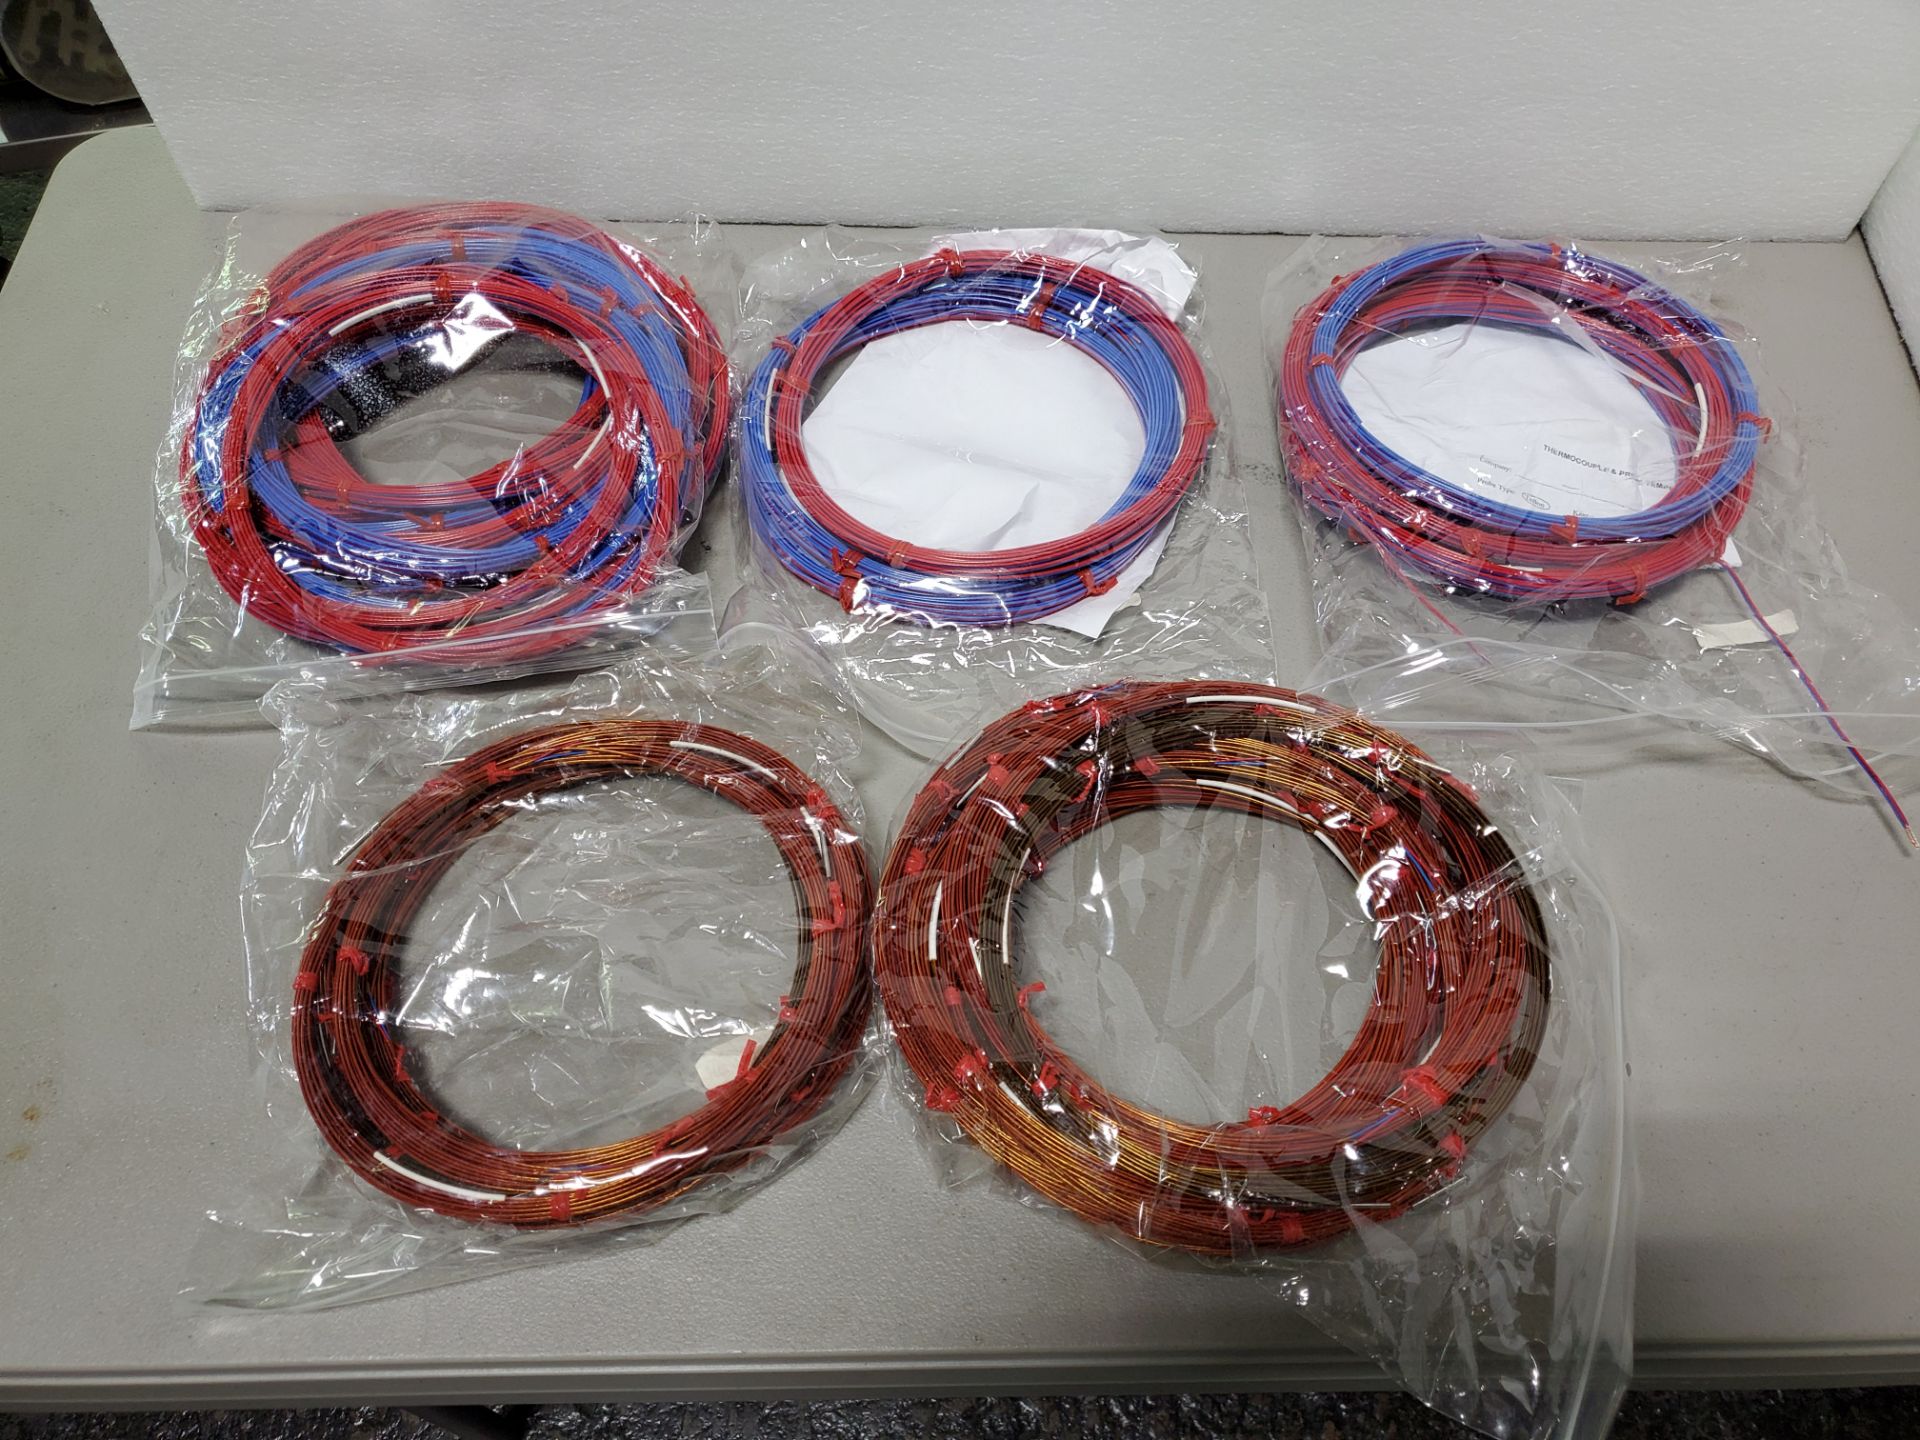 Lot of Kaye Validator wires and thermocouples, unused, both copper and red and blue wires.